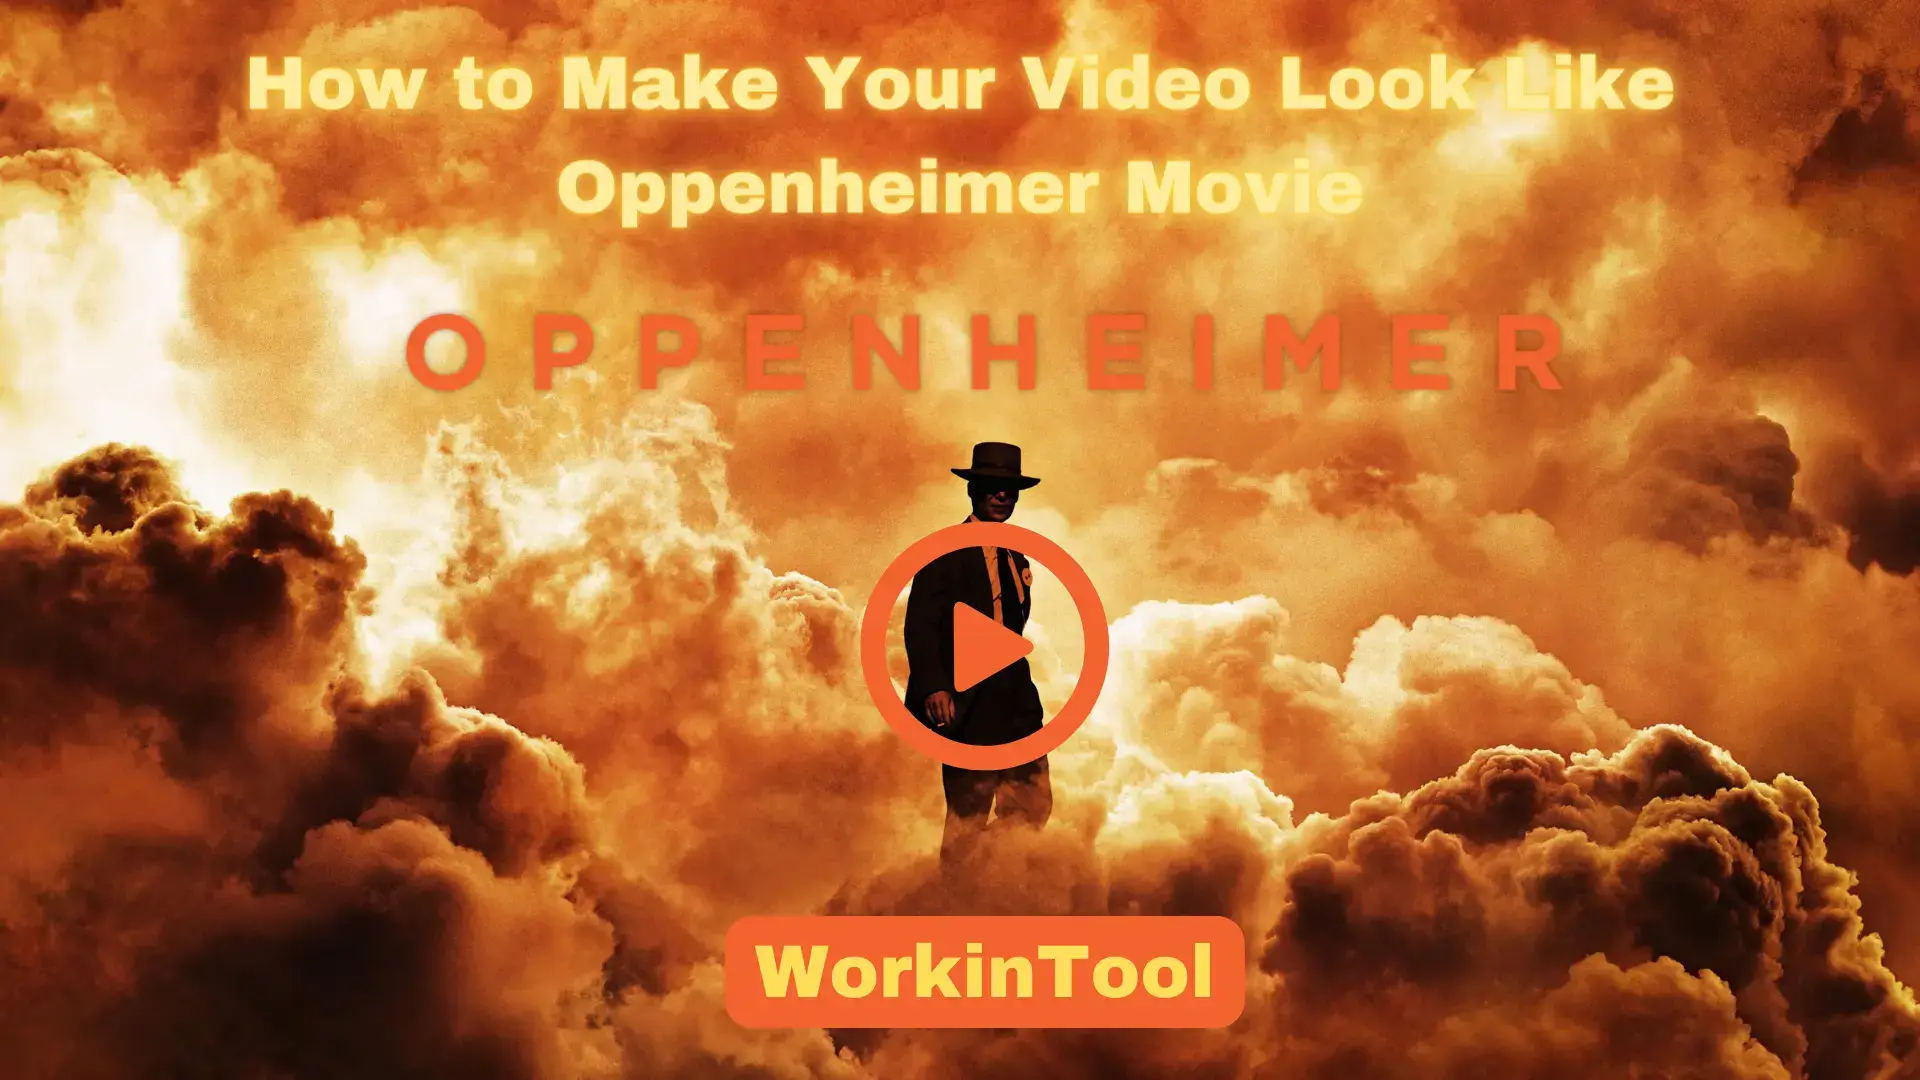 featured image for how to make your video look like oppenheimer movie